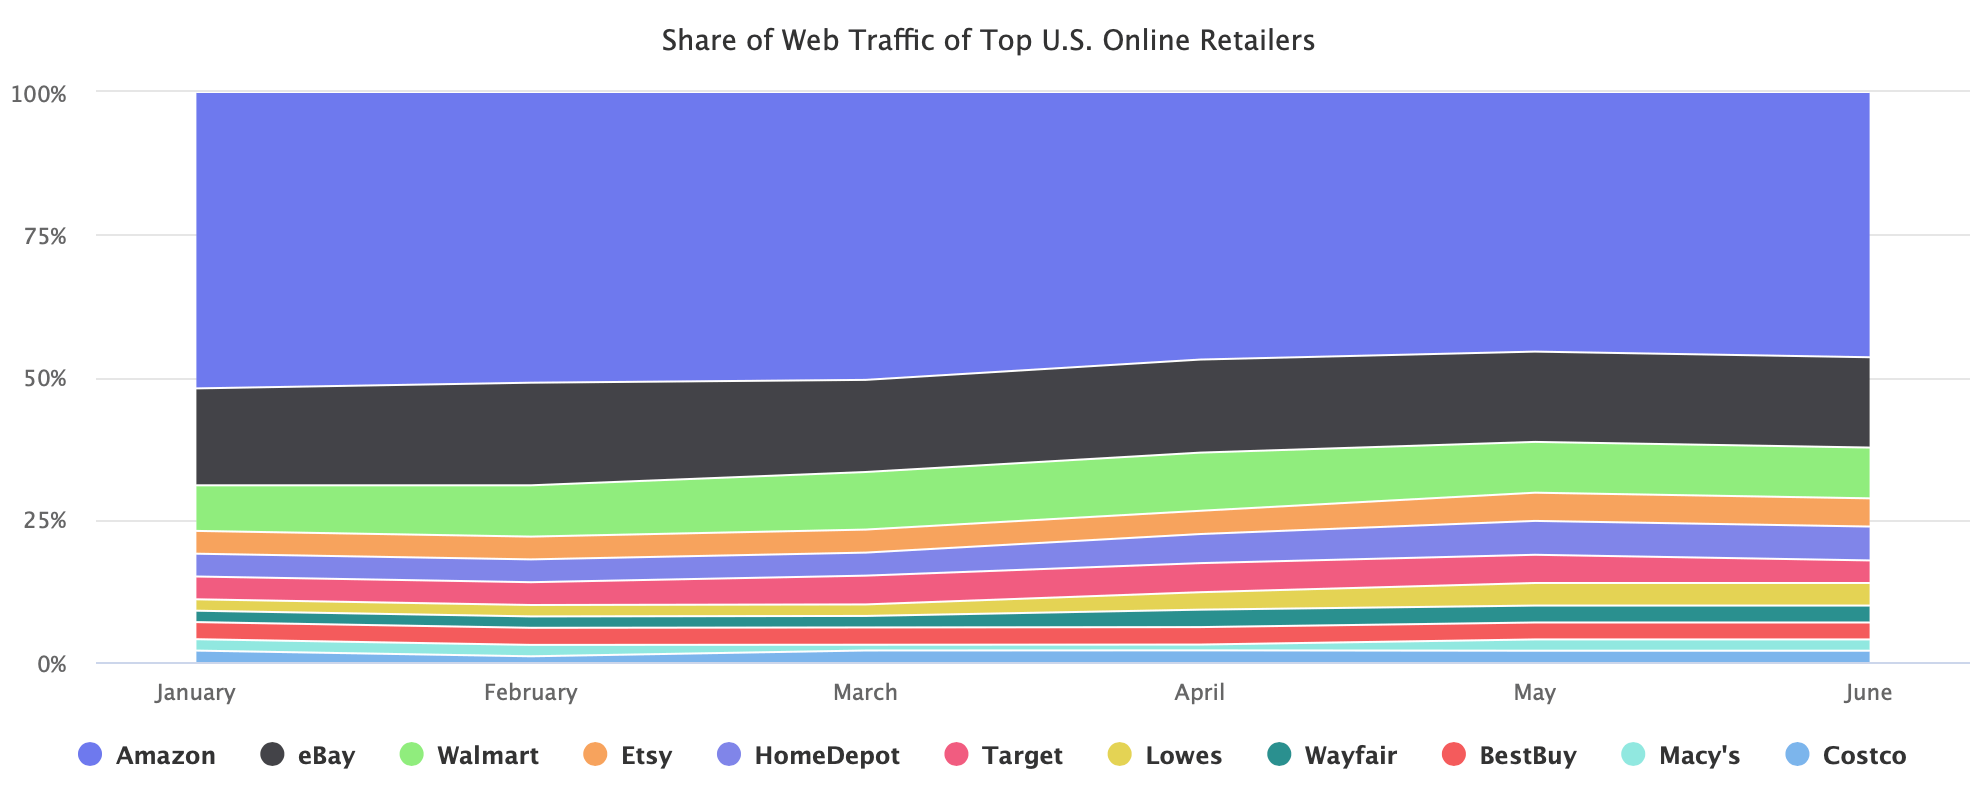 Share of Web Traffic of Top U.S. Online Retailers